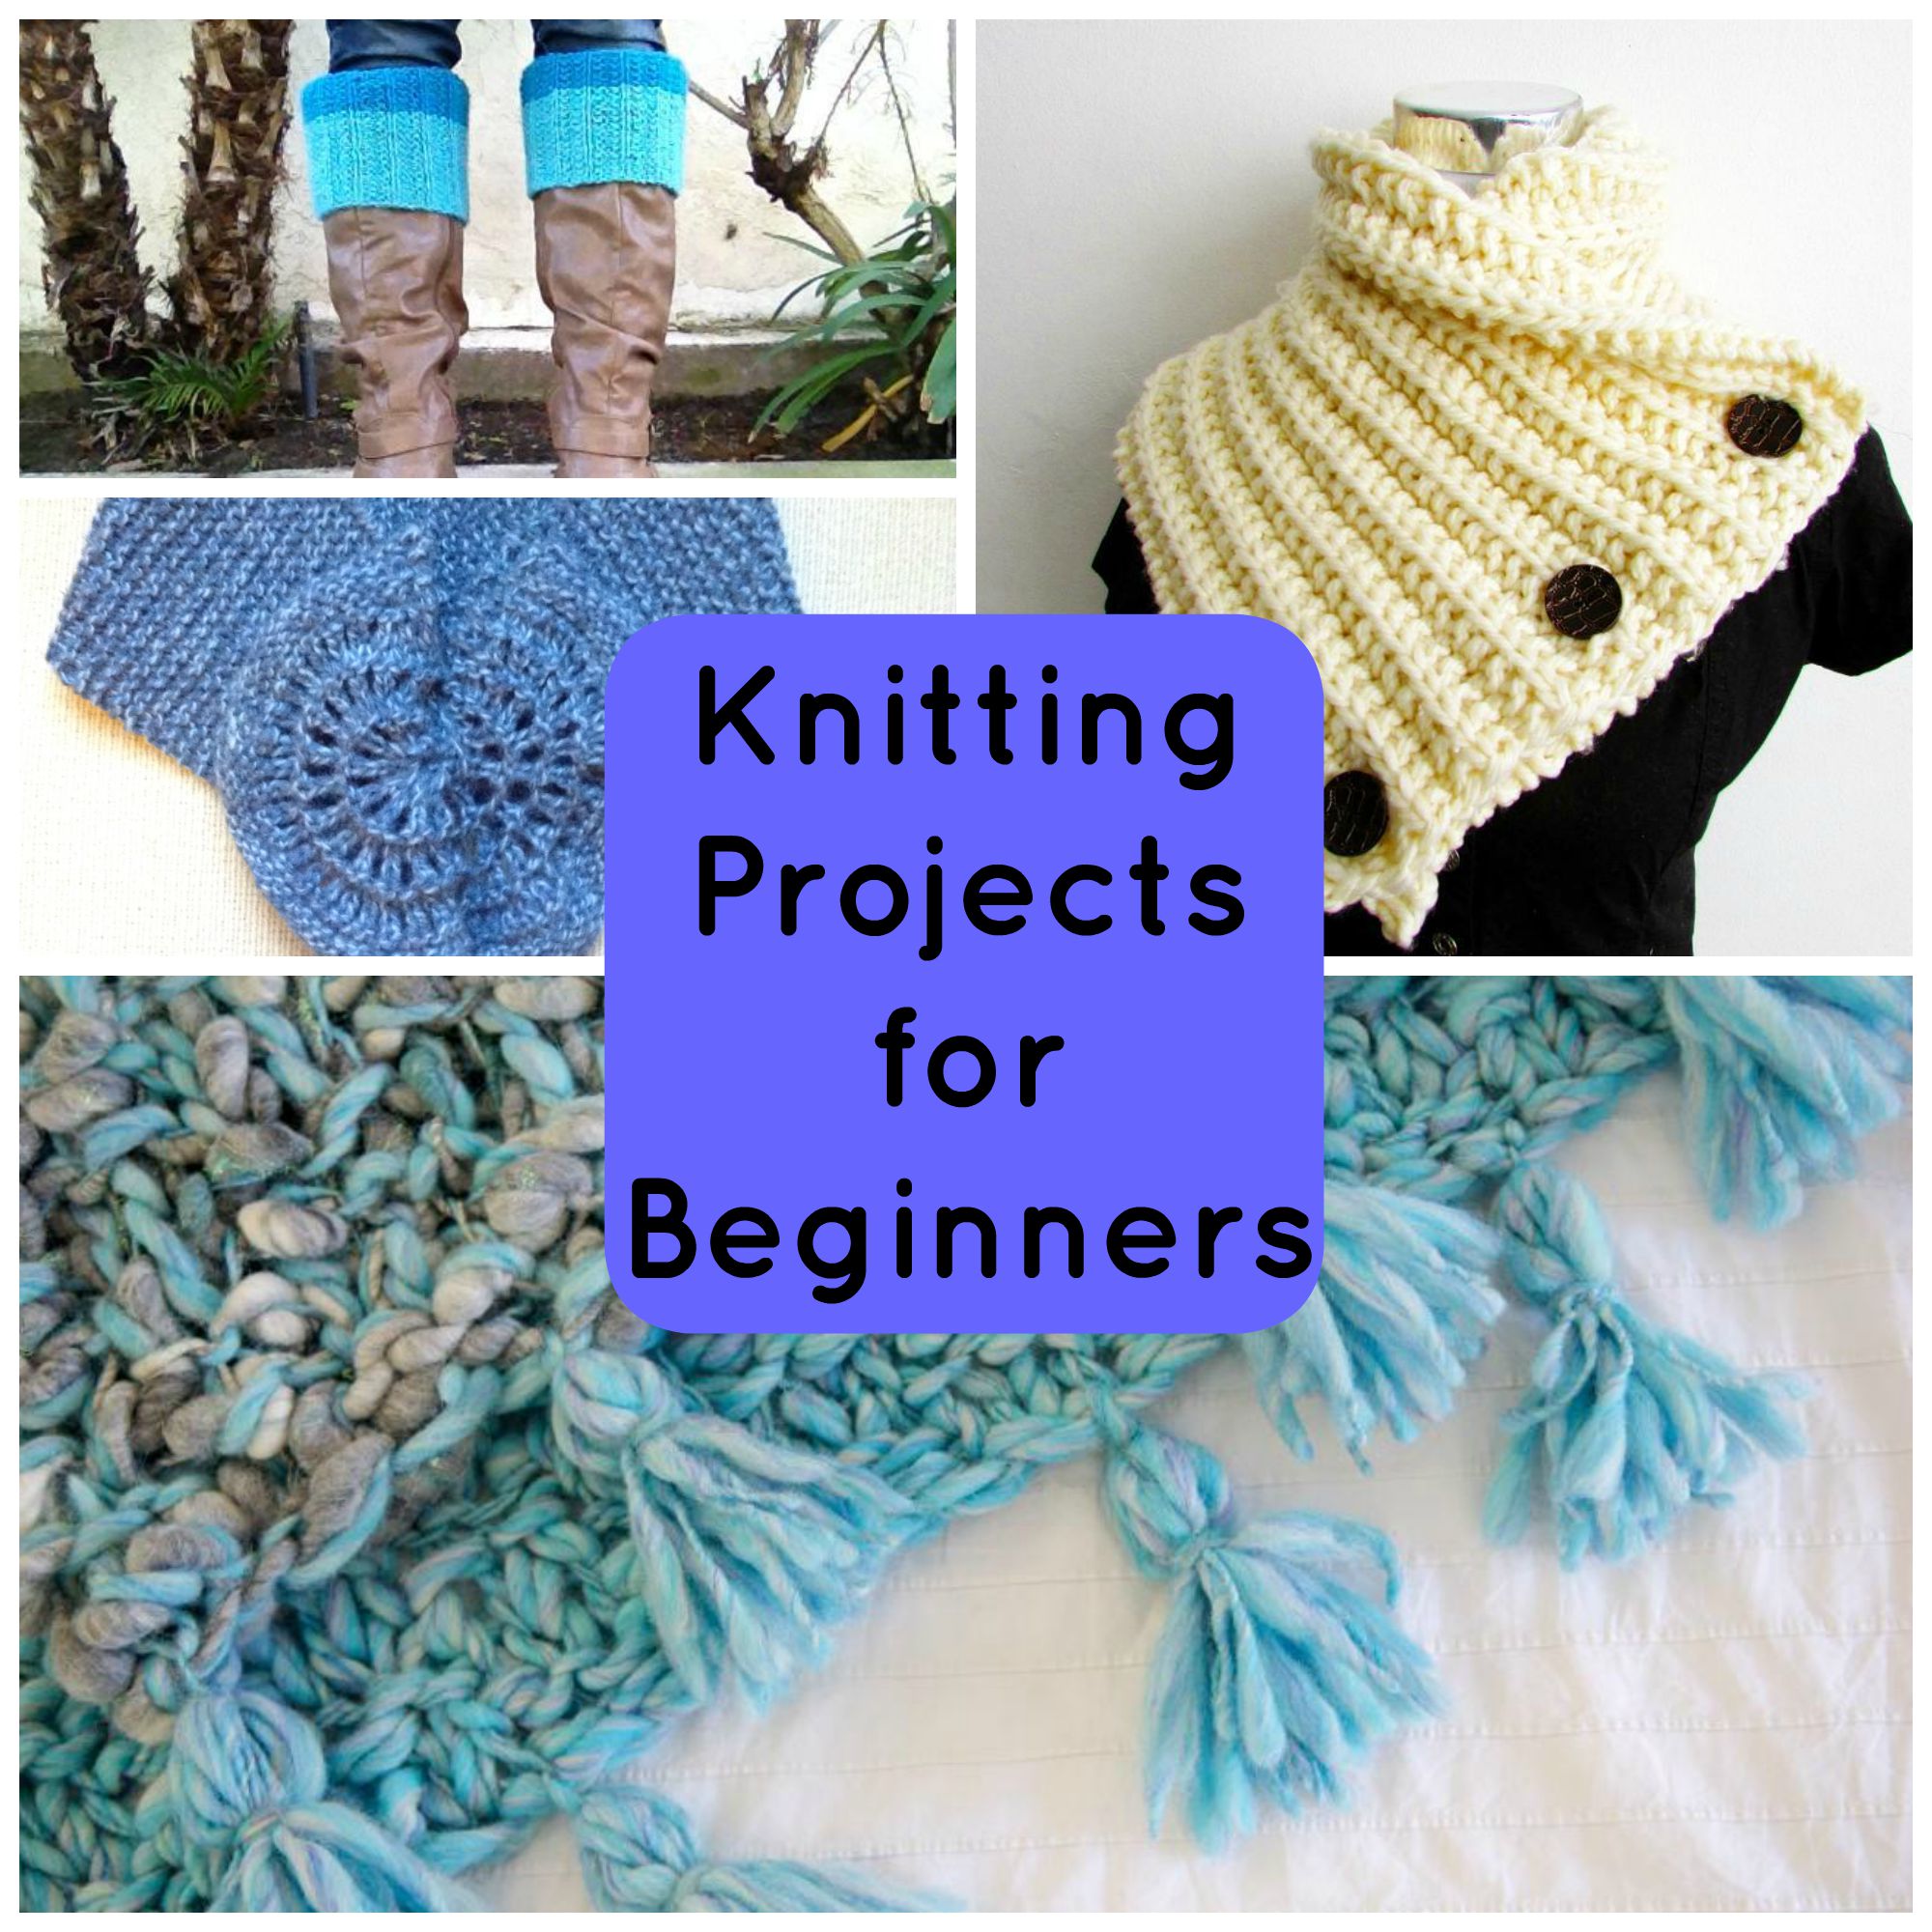 Get Great Knitting Projects for Beginners on Bluprint!